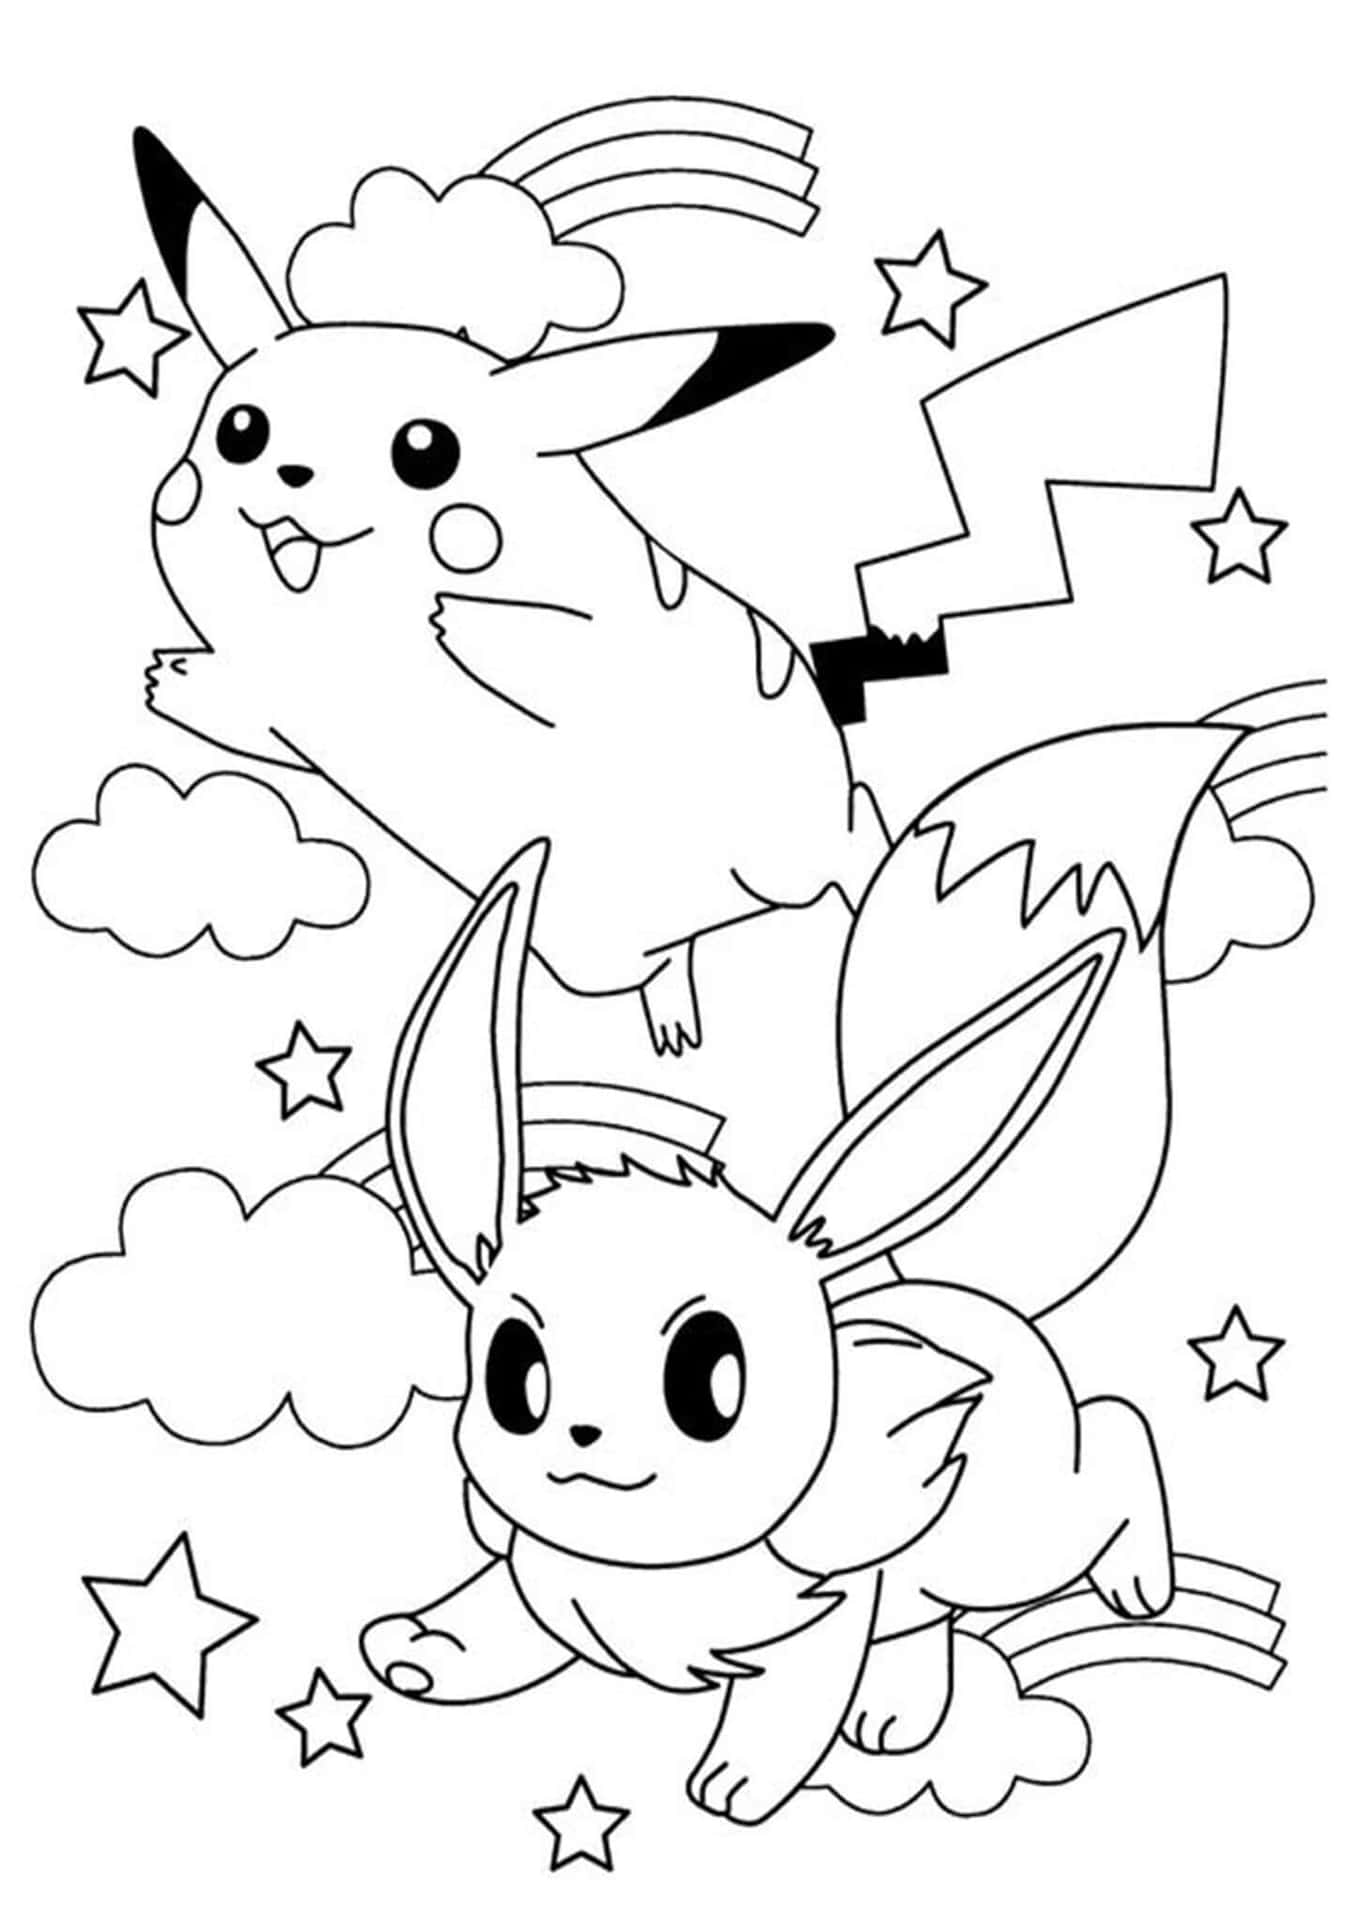 A lovingly colored Pikachu in the "Pokemon Coloring" book!